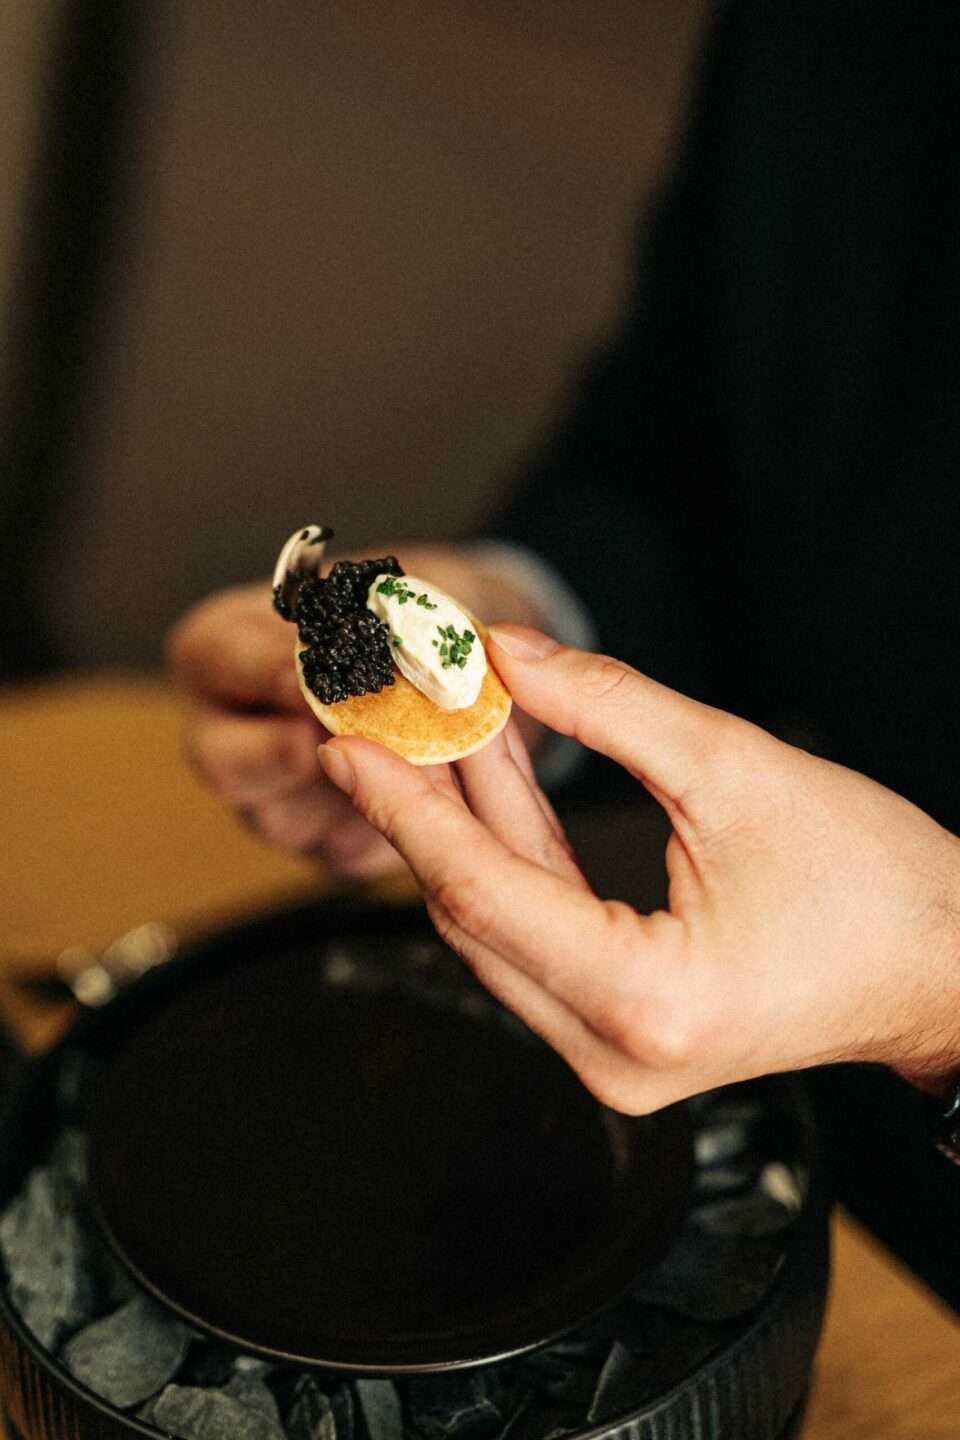 Caviar with buckwheat blini and crème fraîche is held in one hand